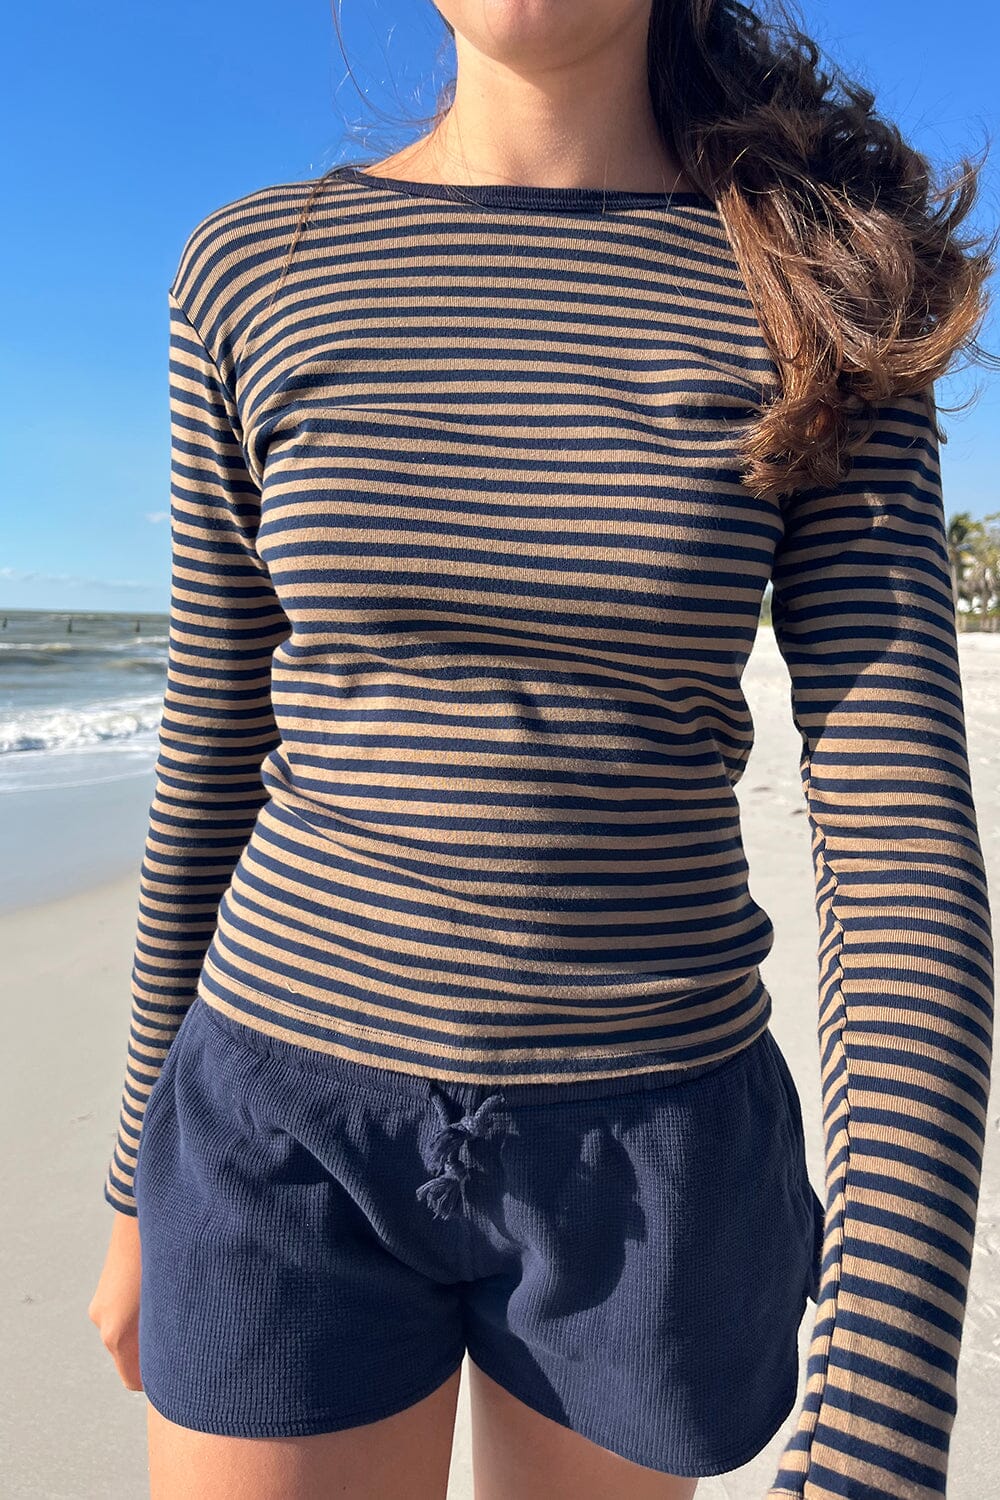 Brandy Melville Blue and White Striped Off the Shoulder Top Size